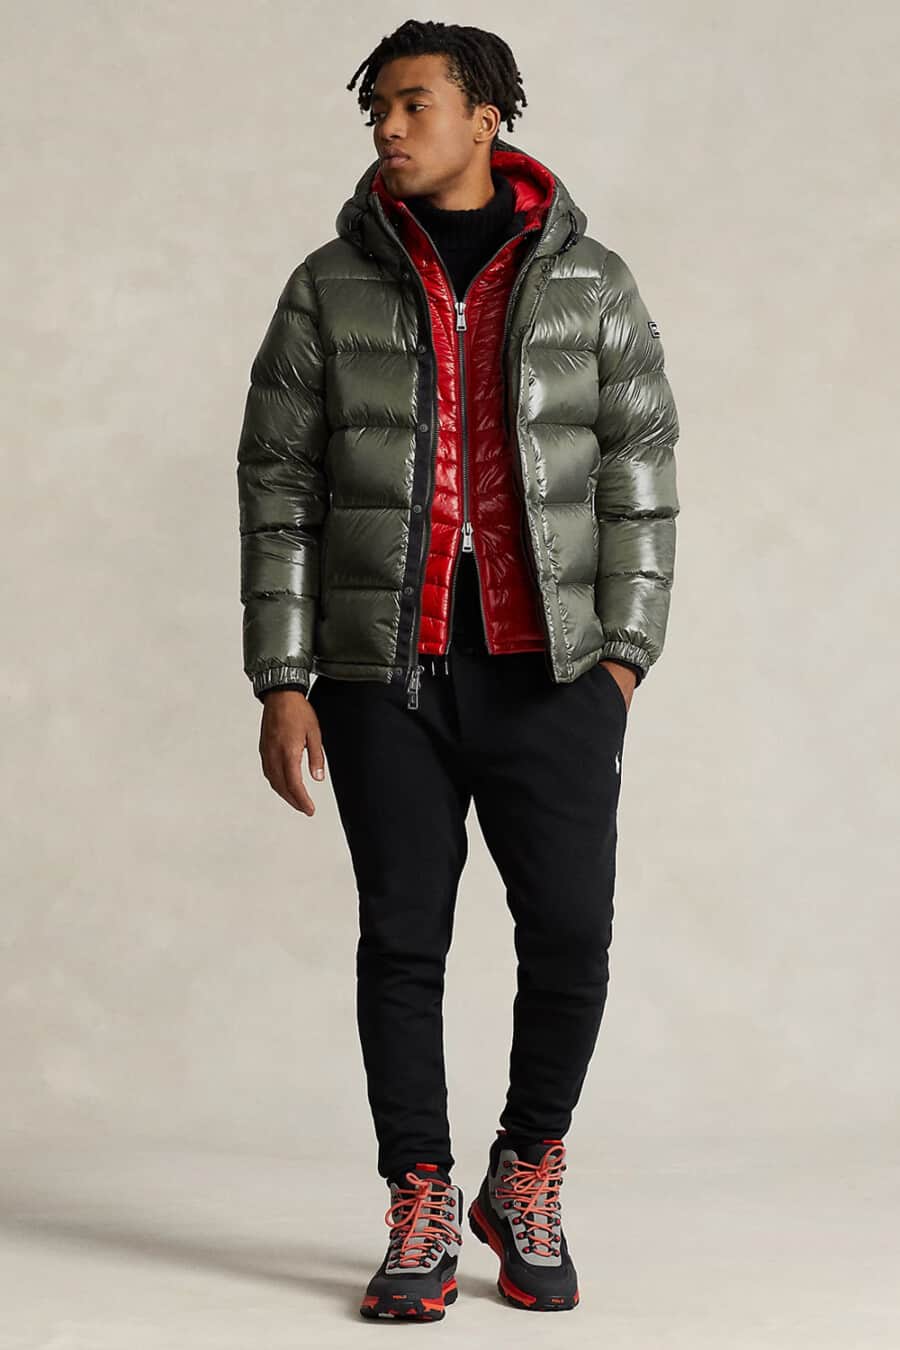 Men's black sweatpants, black top, red puffer vest, green puffer jacket and technical hiking boots outfit